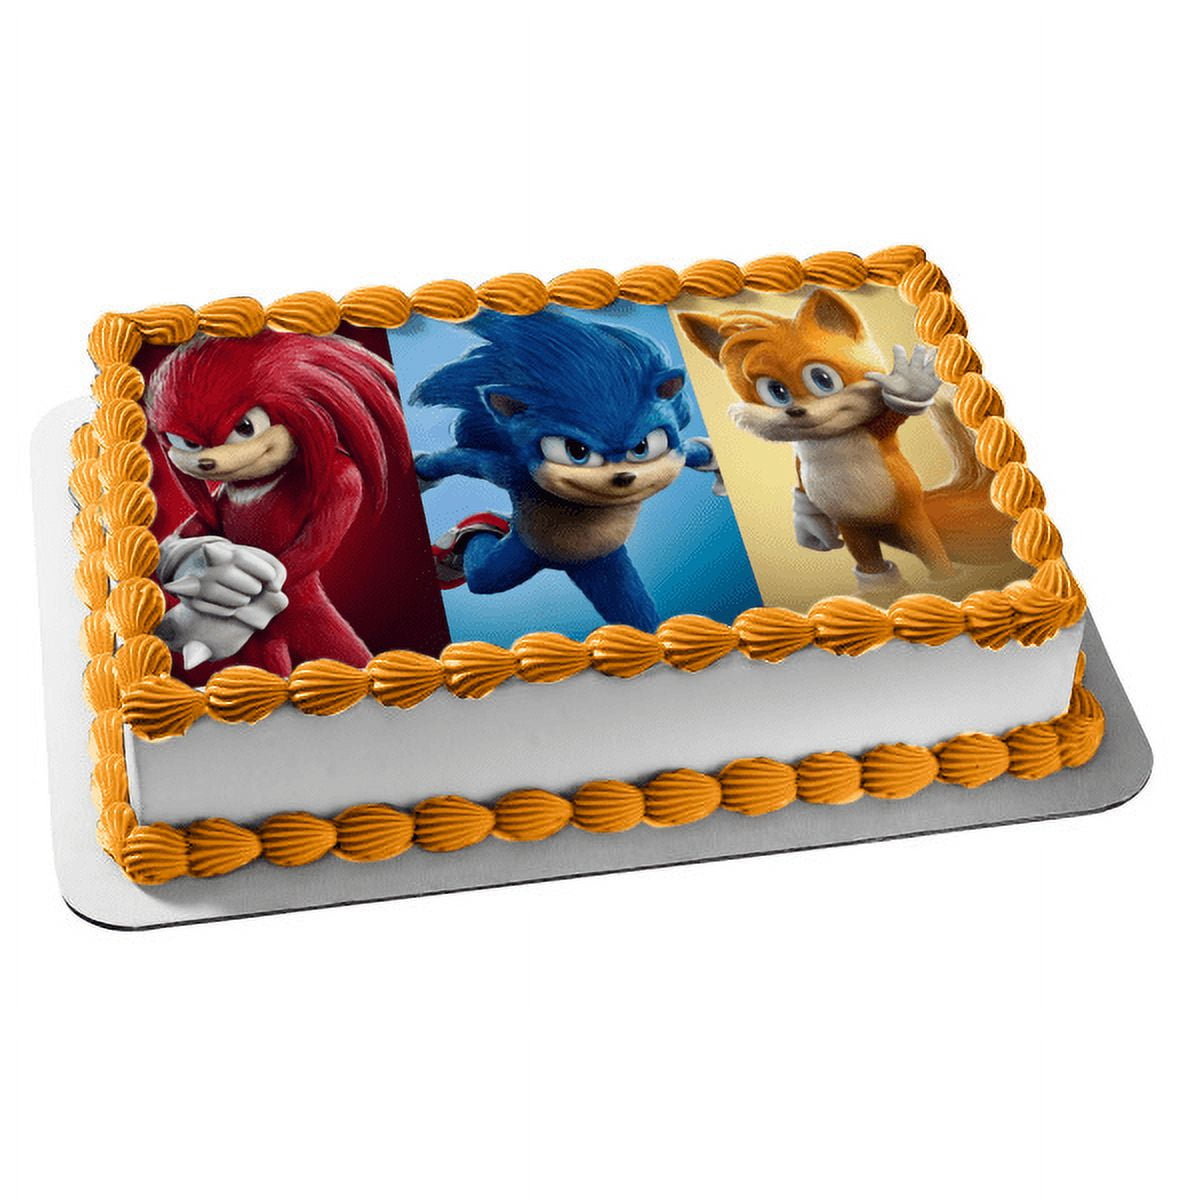 Sonic the Hedgehog Knuckles and Tails Edible Cake Topper Image